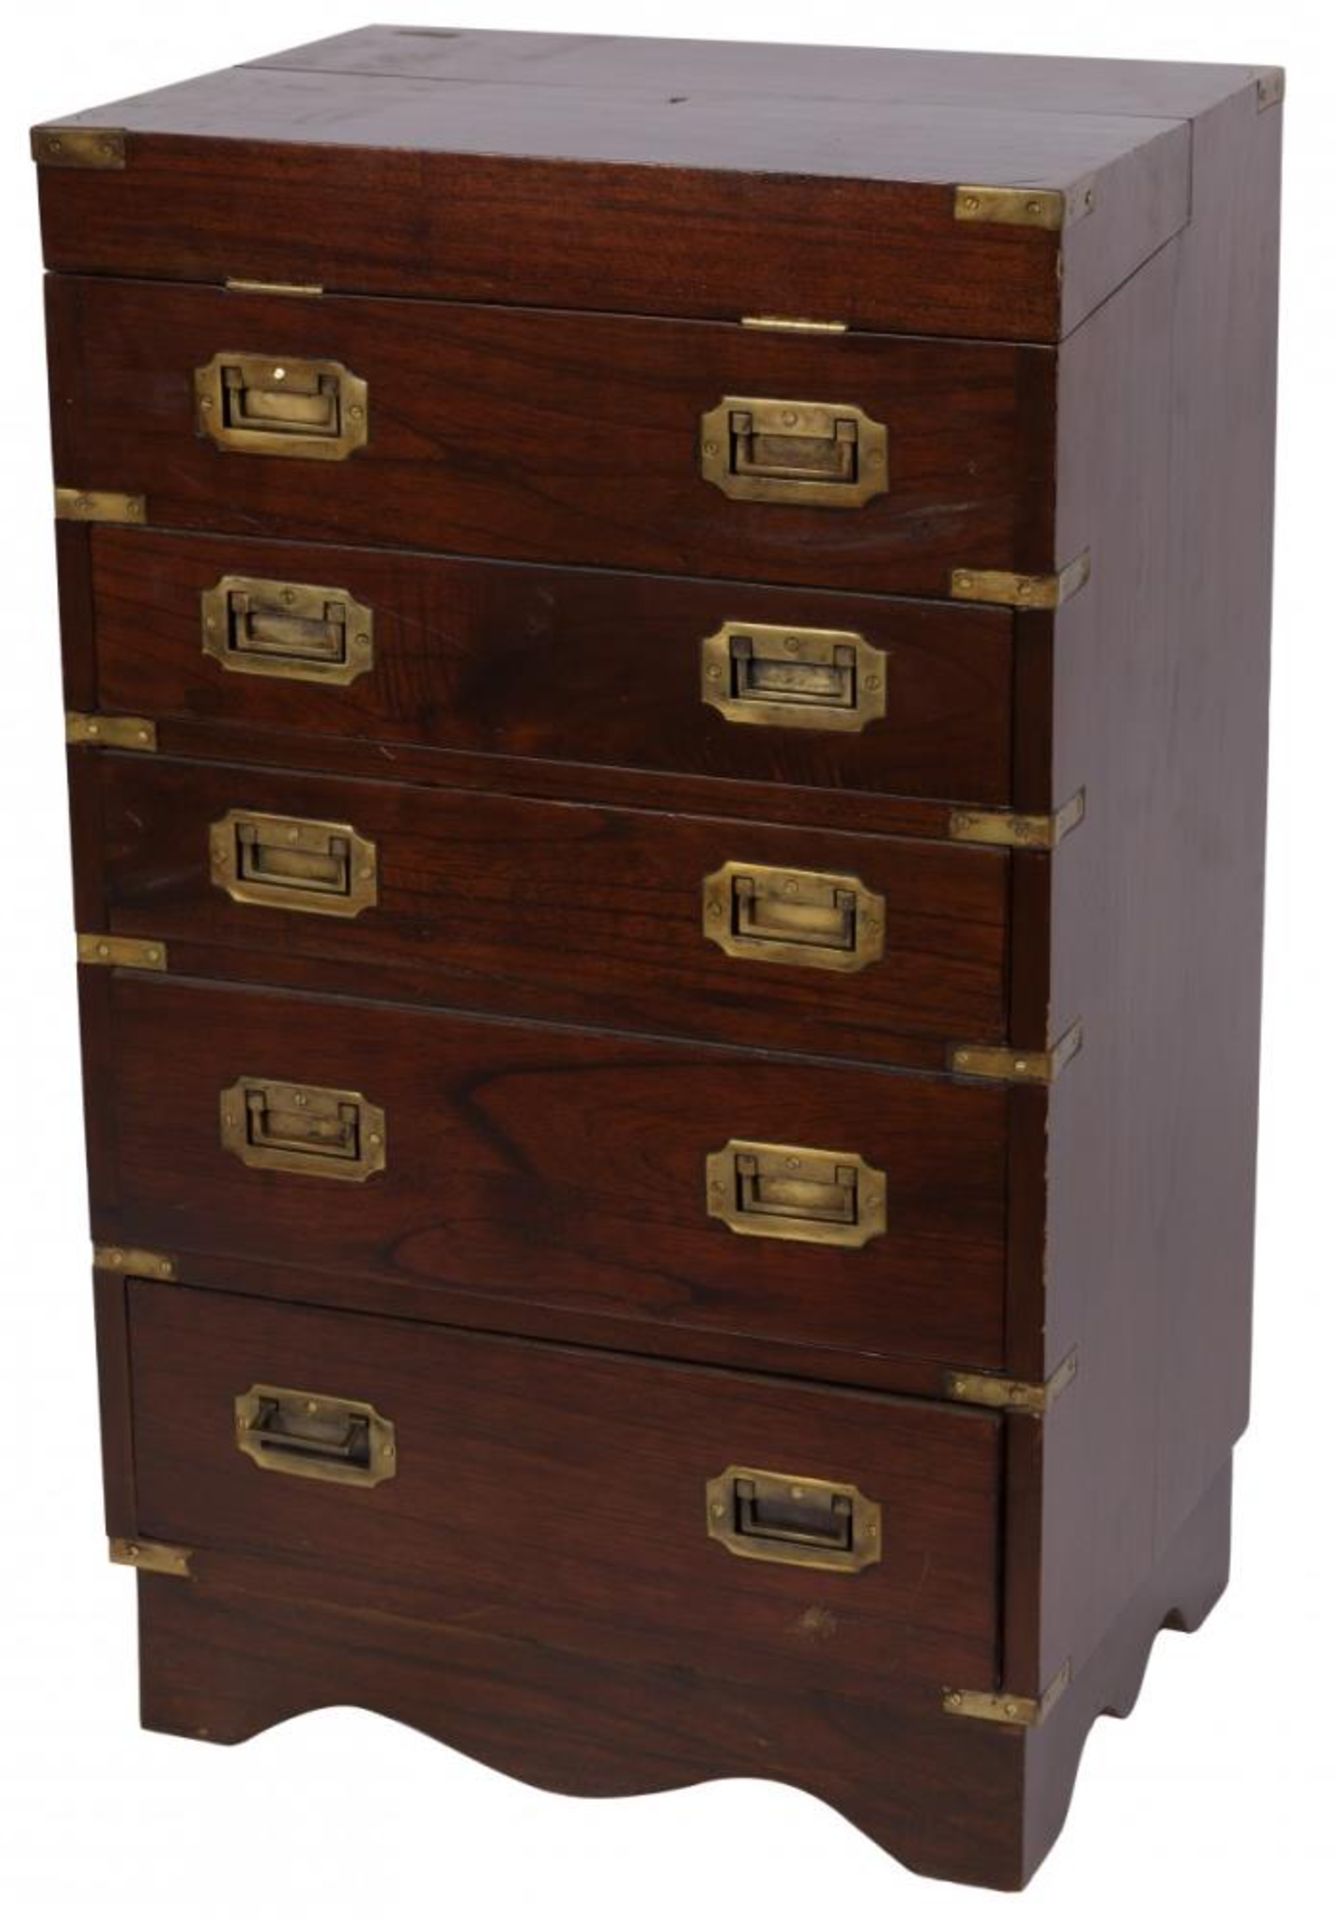 A colonial style military campaign desk cabinet / mule chest, 20th century.